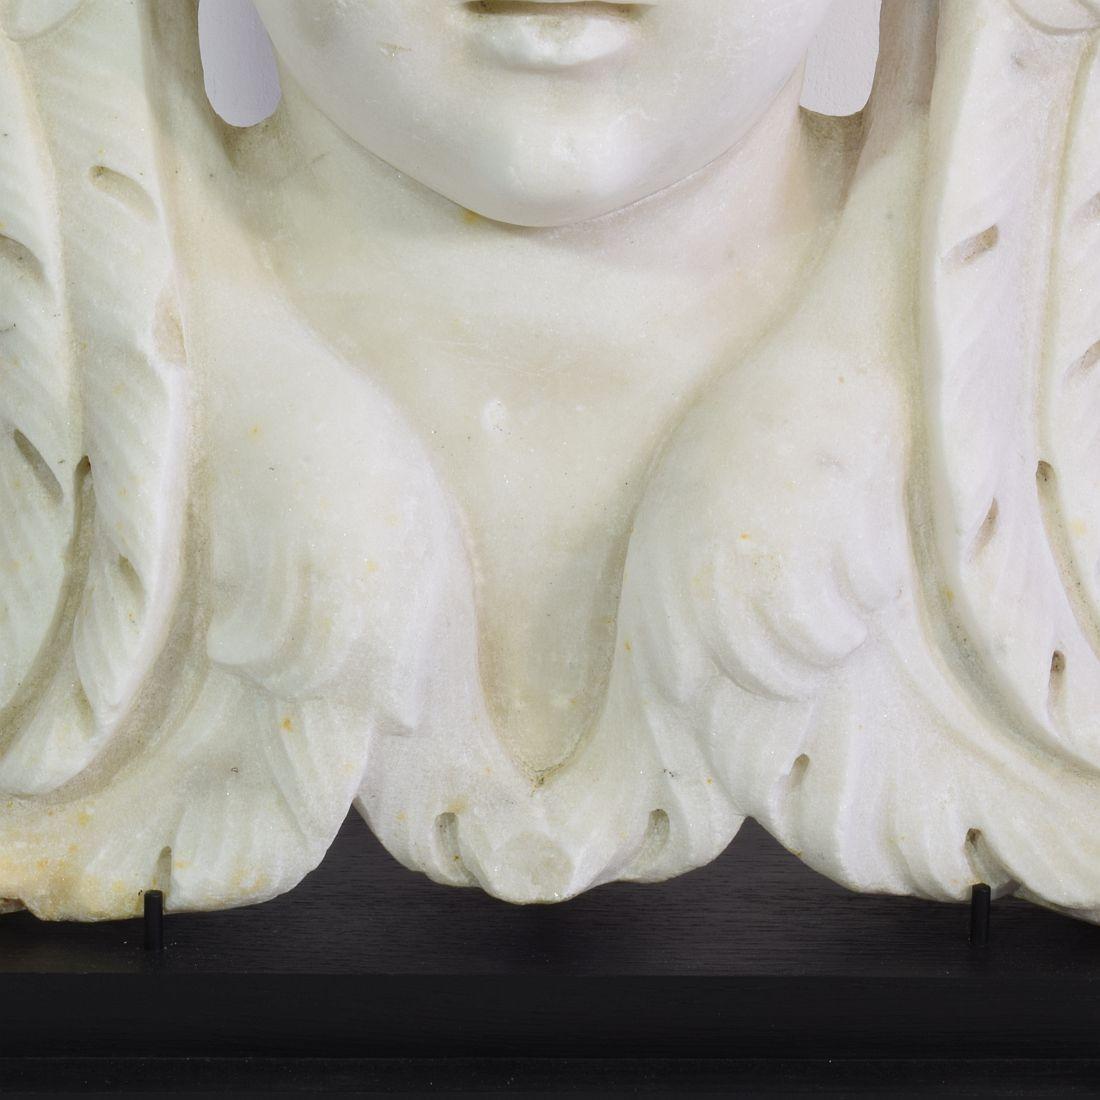 Italian, 17th / 18th Century Carved White Marble Winged Angel Head Ornament For Sale 6